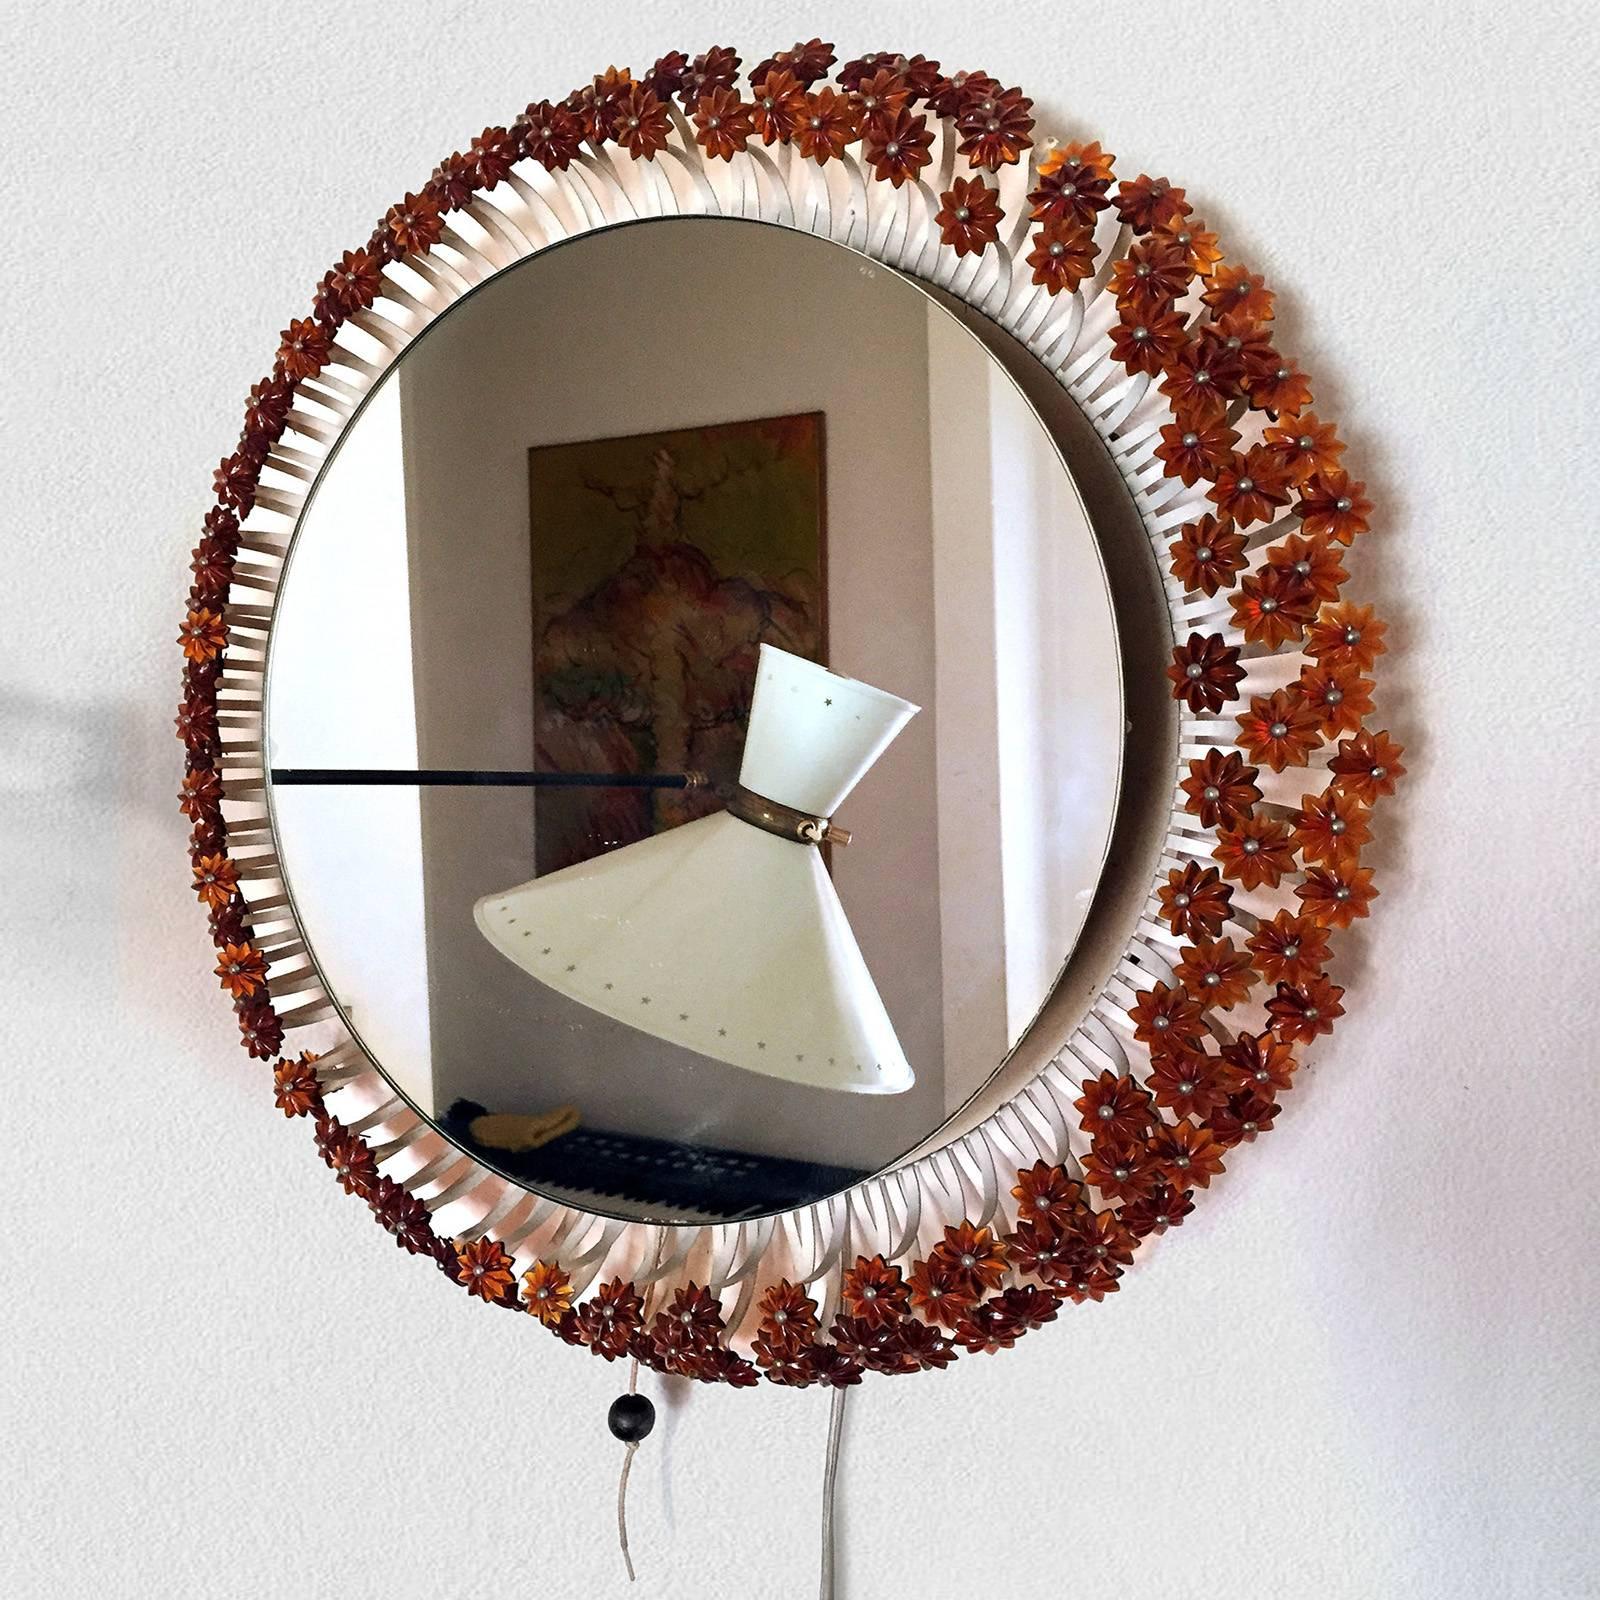 This stylish and charming backlit mirror was designed by Emil Stejnar for Rupert Nikoll in the 50s for the famous coffeehouse 